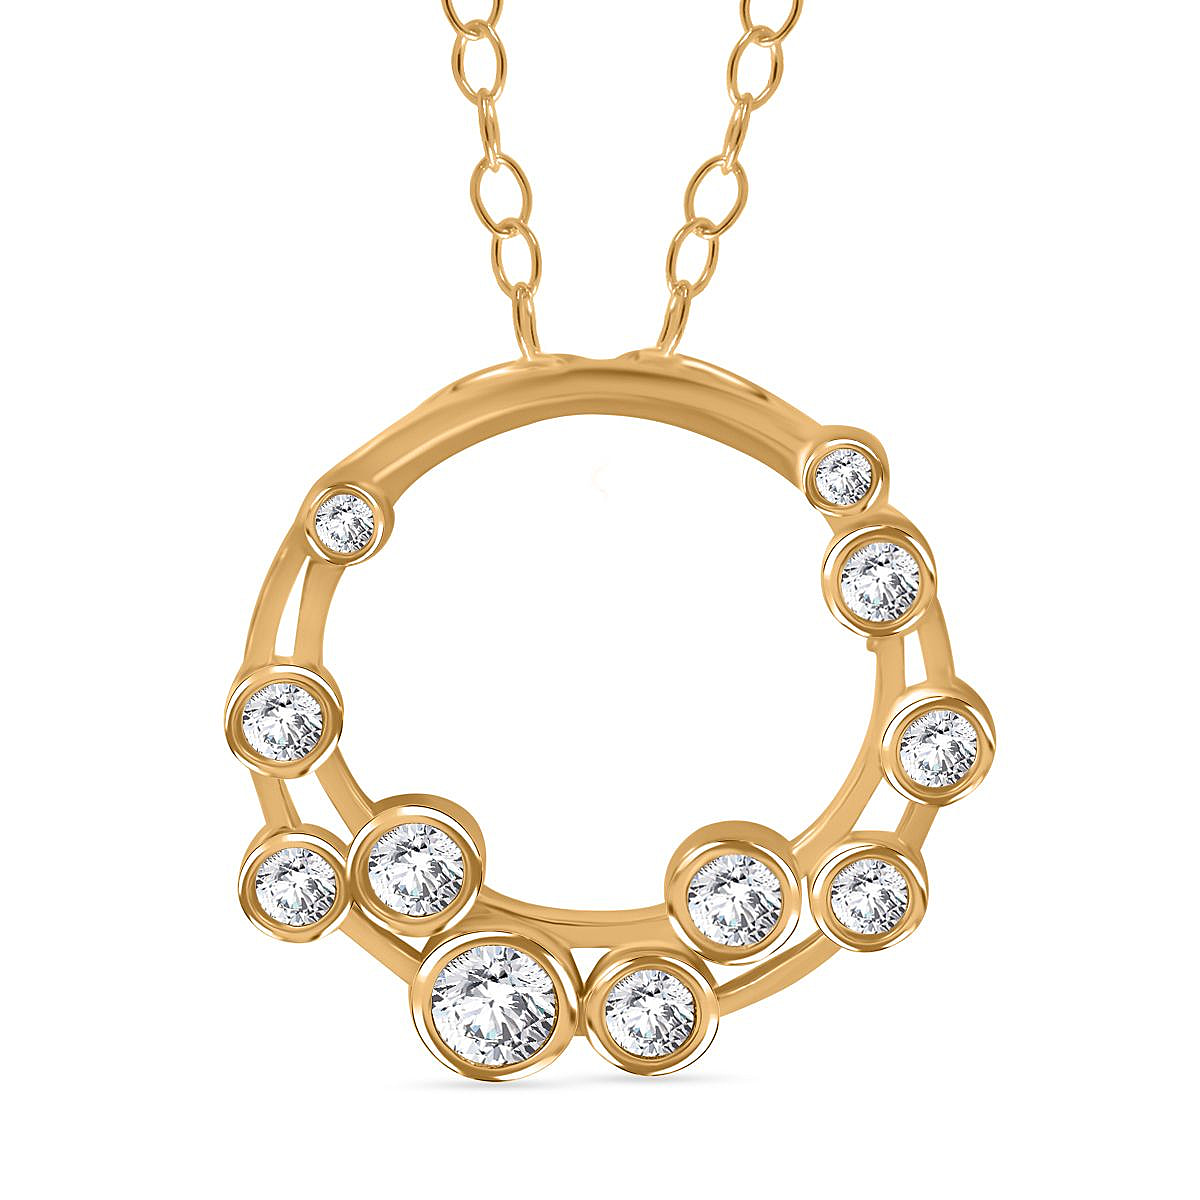 Designer Inspired - Moissanite Bubble Necklace (Size 20) in 18K Yellow Gold Vermeil Plated Sterling Silver